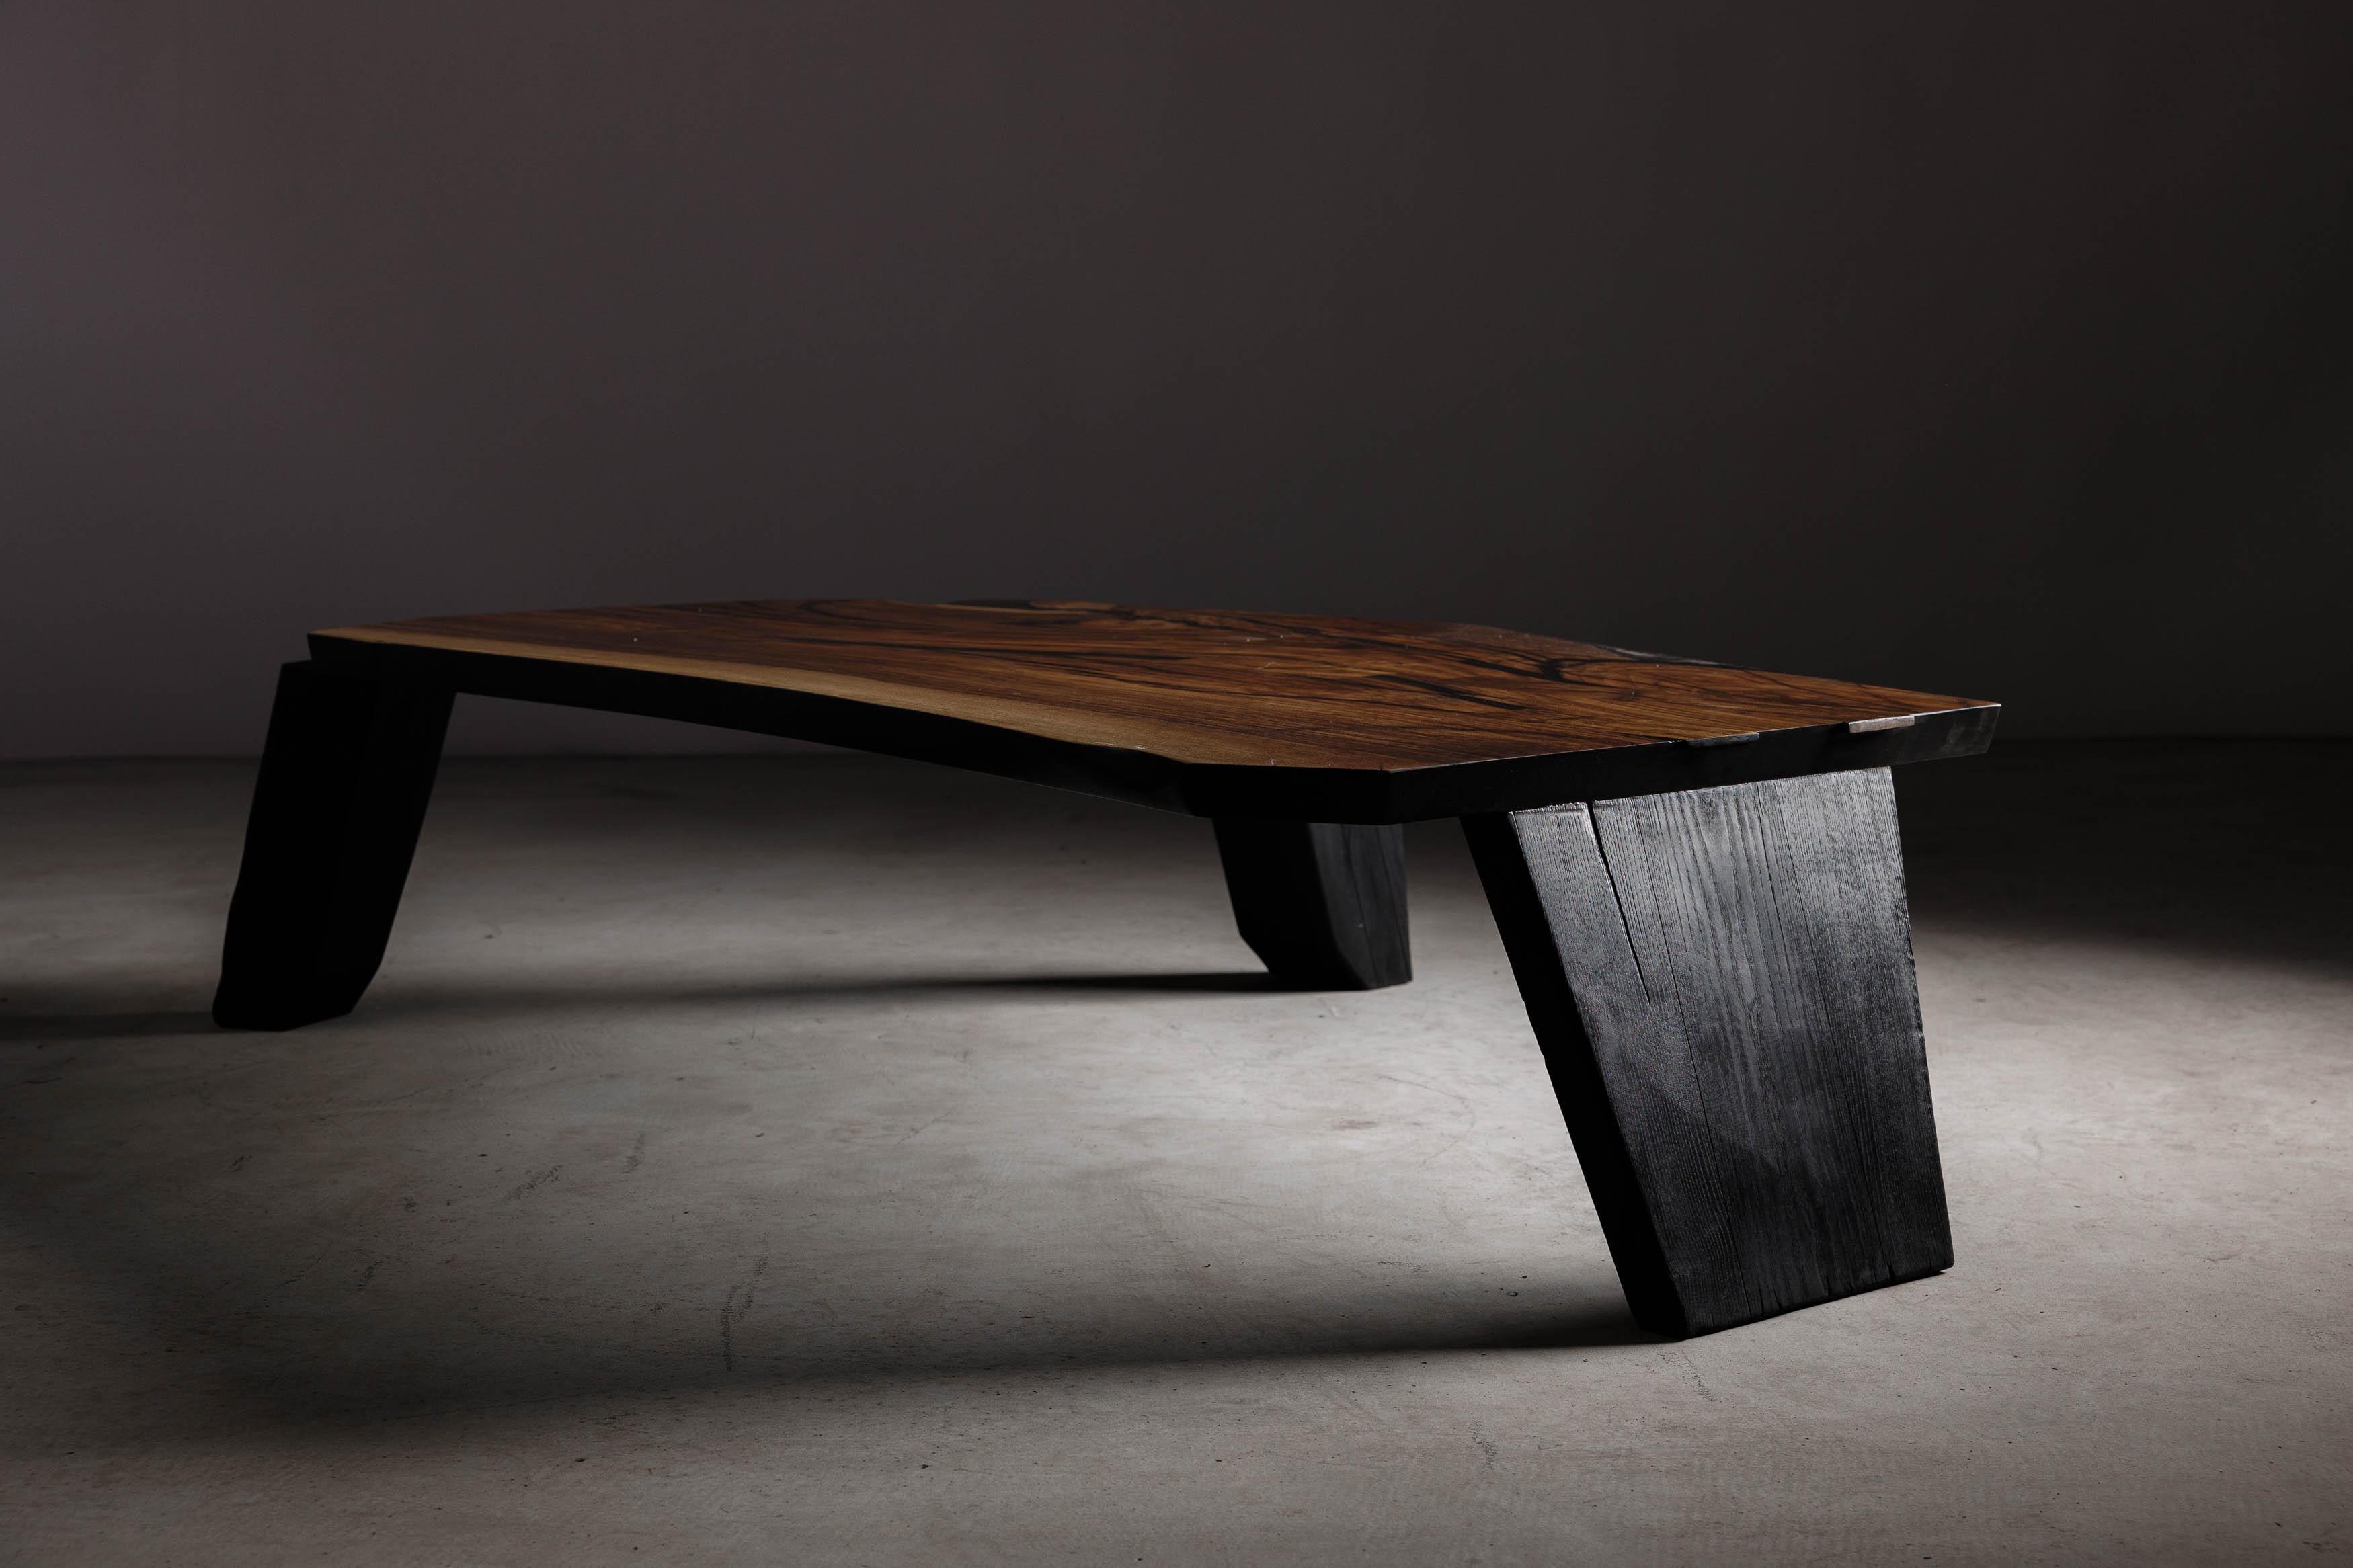 Indulge in the luxurious texture and warmth of this hand-made brutalist walnut coffee table from Eero Moss Studio. Meticulously crafted with the finest materials and fire, this coffee table is a stunning example of craftsmanship.

The natural